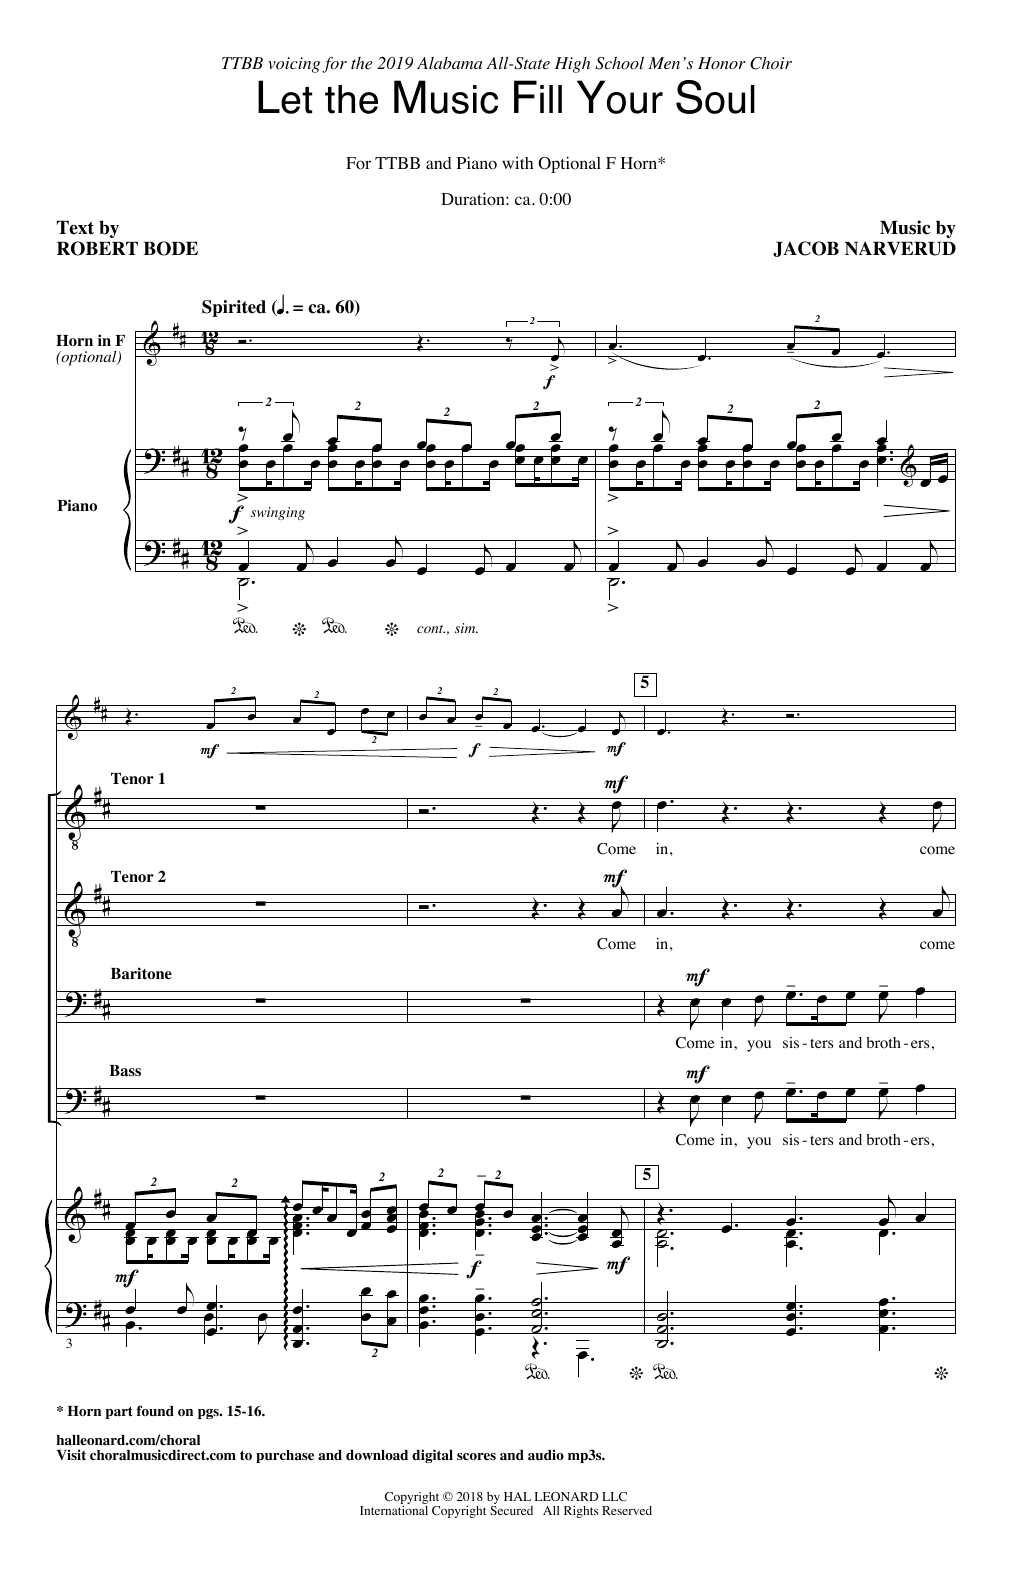 Download Jacob Narverud Let The Music Fill Your Soul Sheet Music